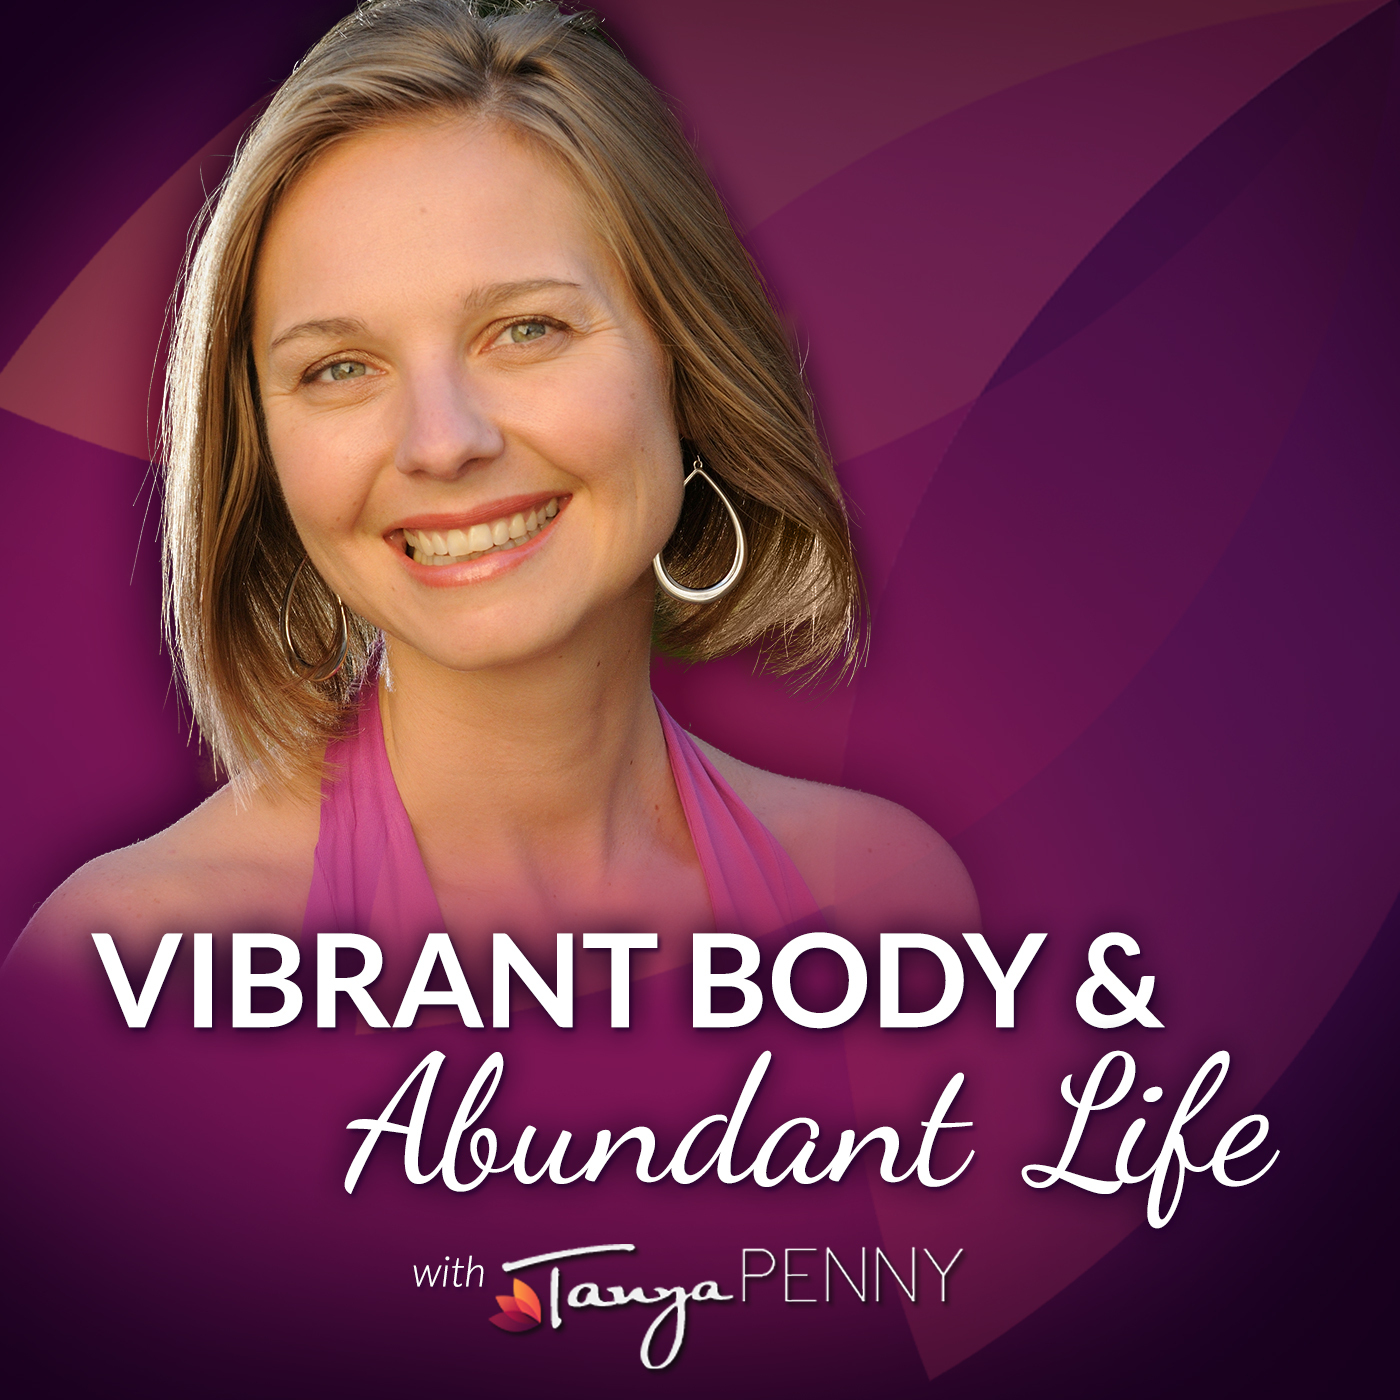 A Behind the Scenes Interview with the Creator of Vibrant Body and Abundant Life